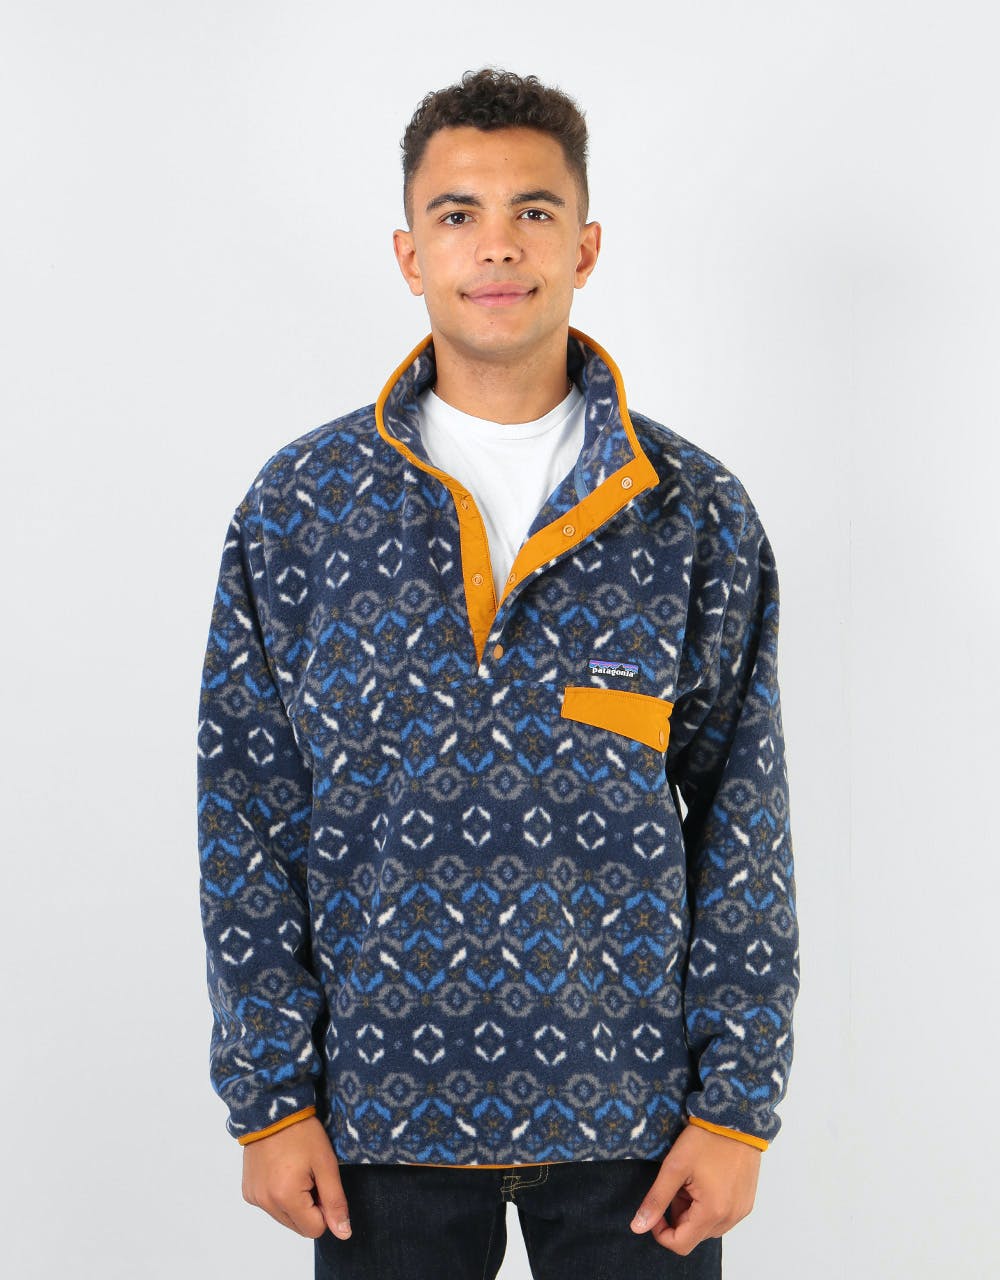 Patagonia Synchilla Snap-T Pullover - Tundra Cluster: Neo Navy